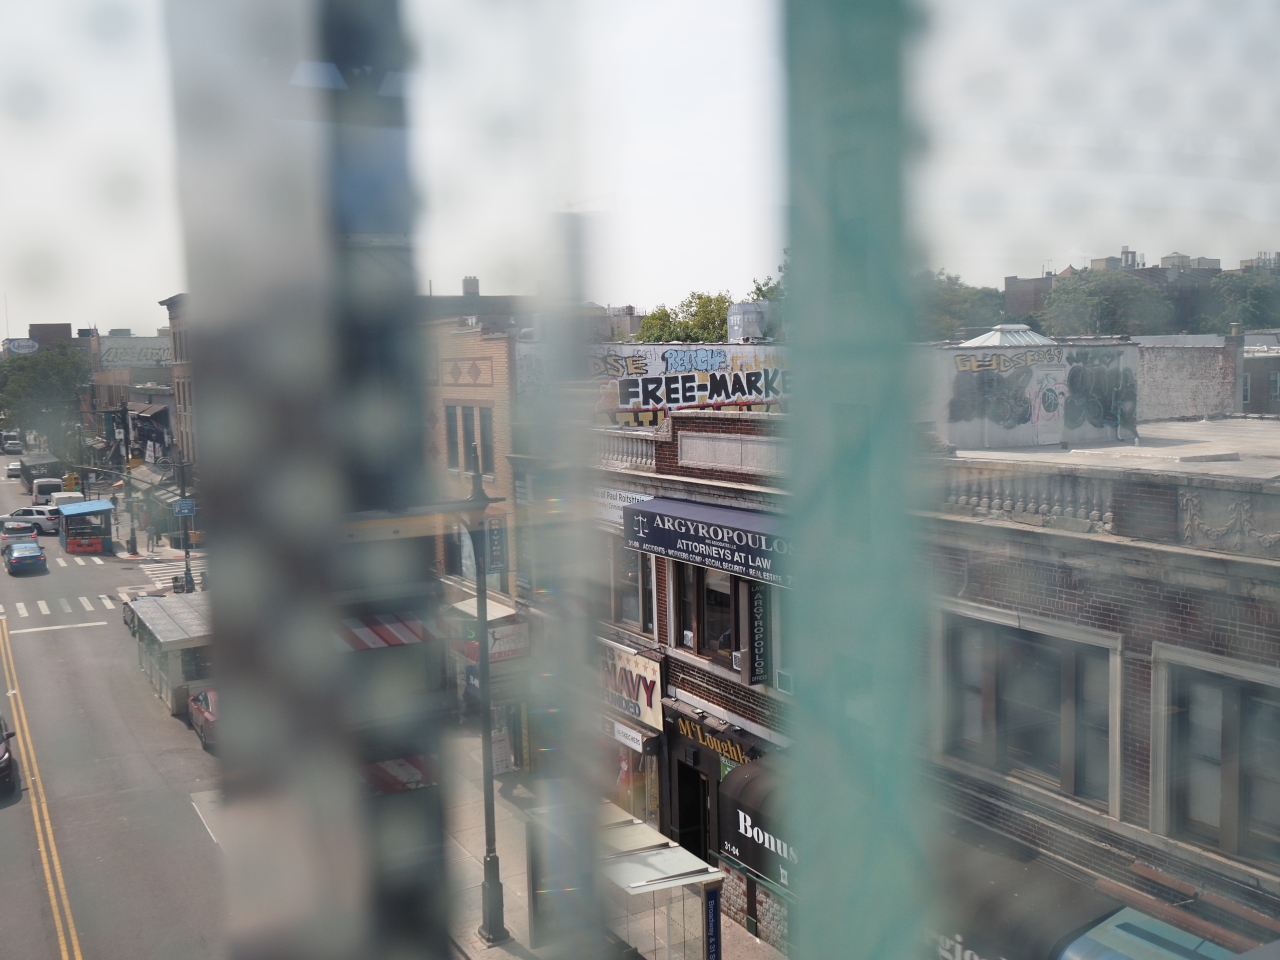 View from an elevated train in Astoria (July 2021)